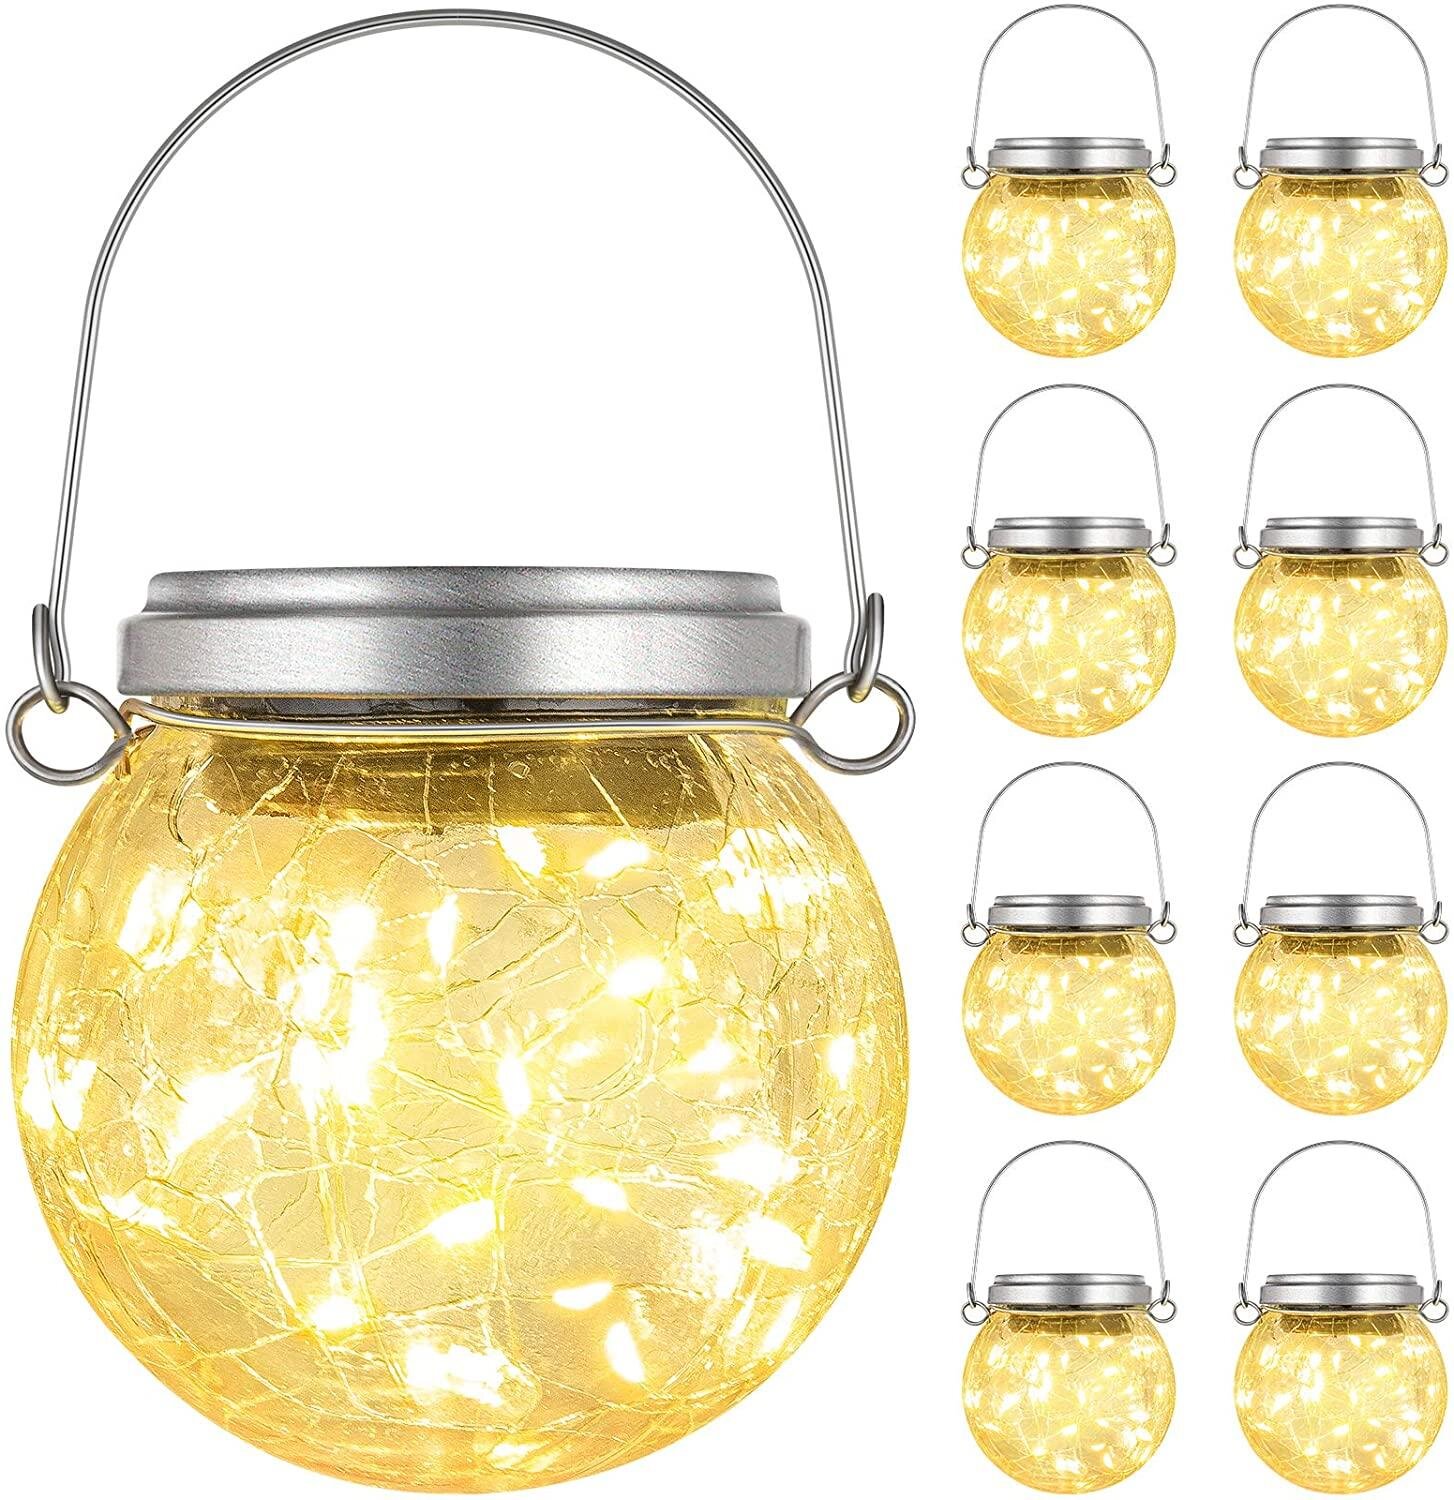 12 Pack Hanging Solar Lights Outdoor Decorative,Solar Powered Cracked Glass 